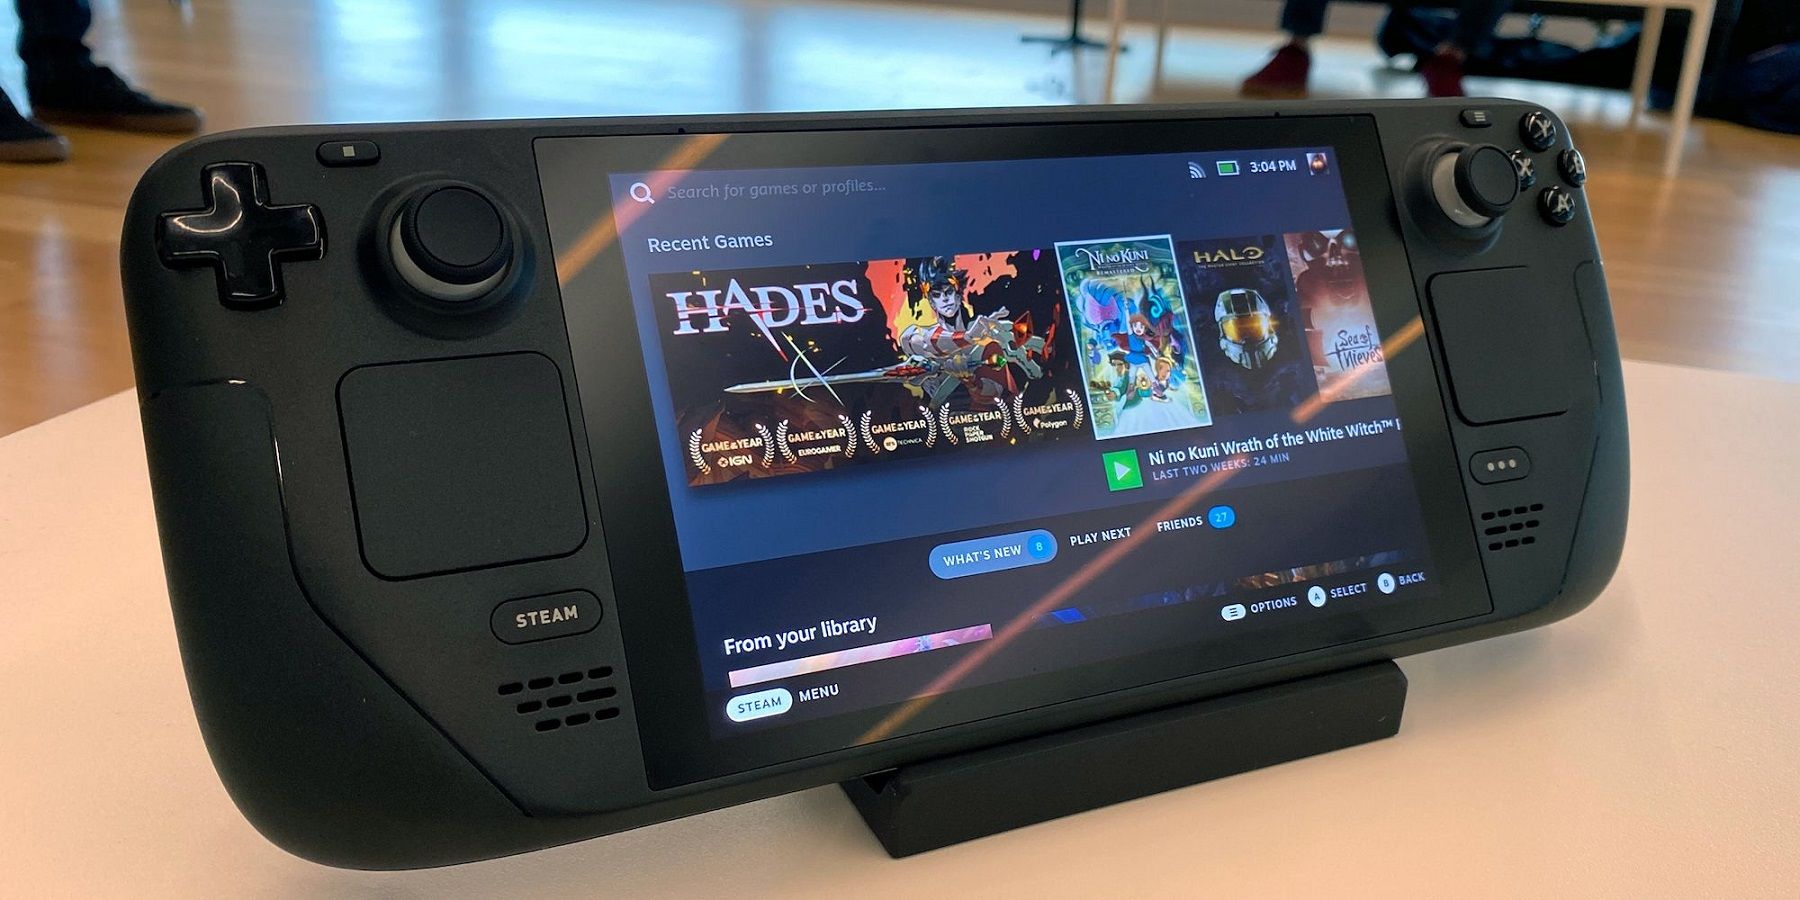 A Steam Deck on a holder showing a recent games list on-screen.